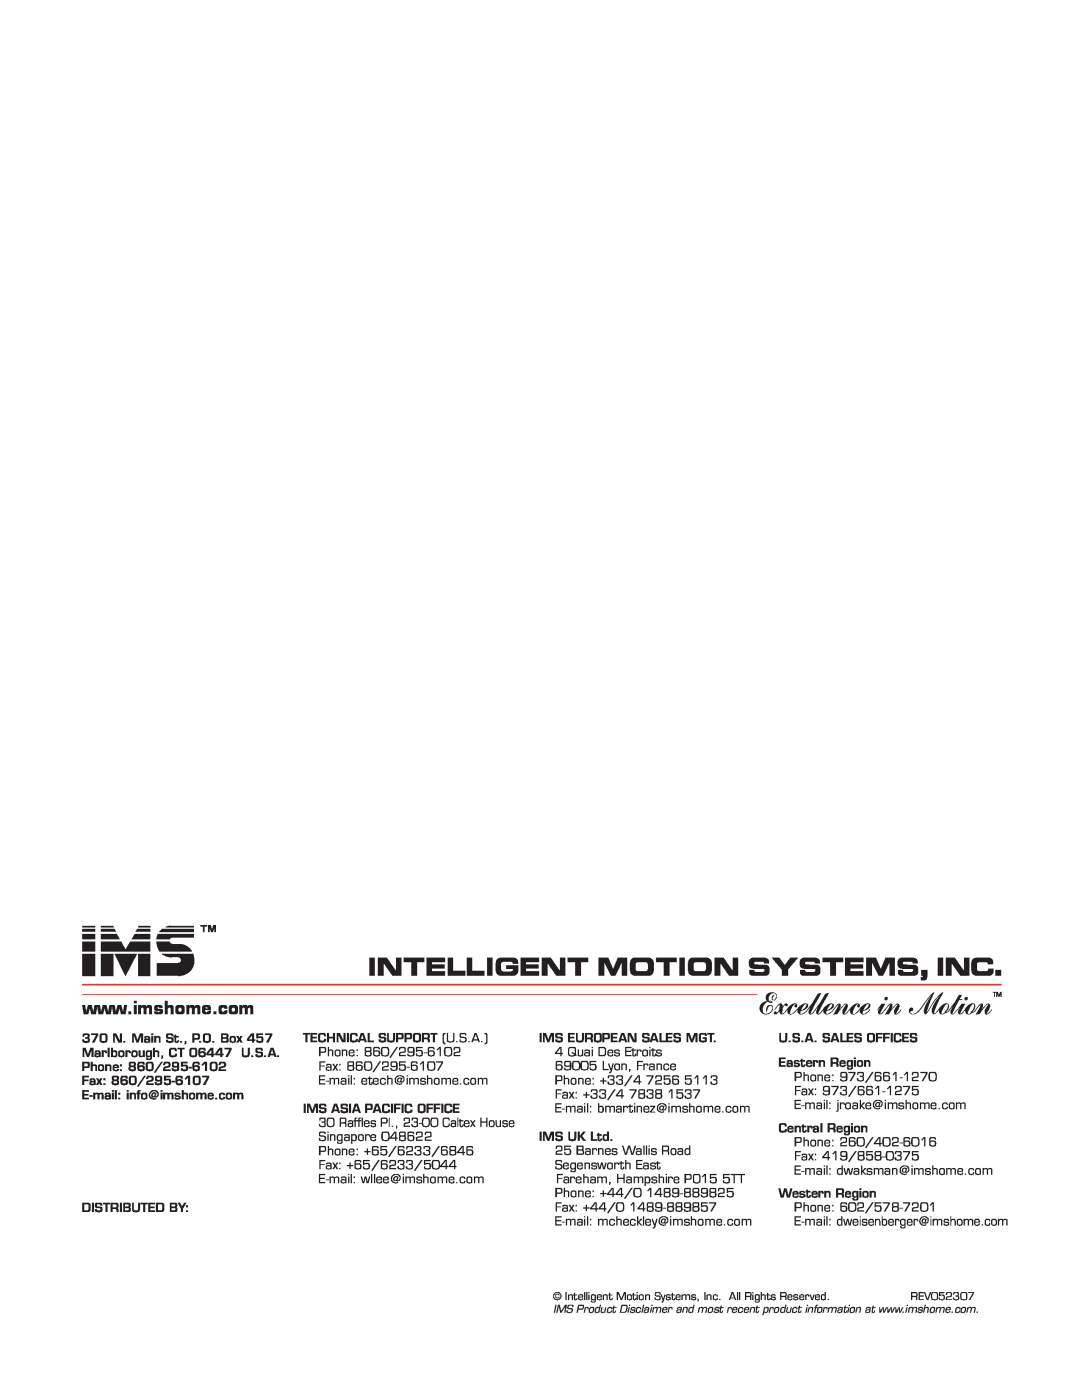 Intelligent Motion Systems Excellence in Motion manual intelligent motion systems, INC 